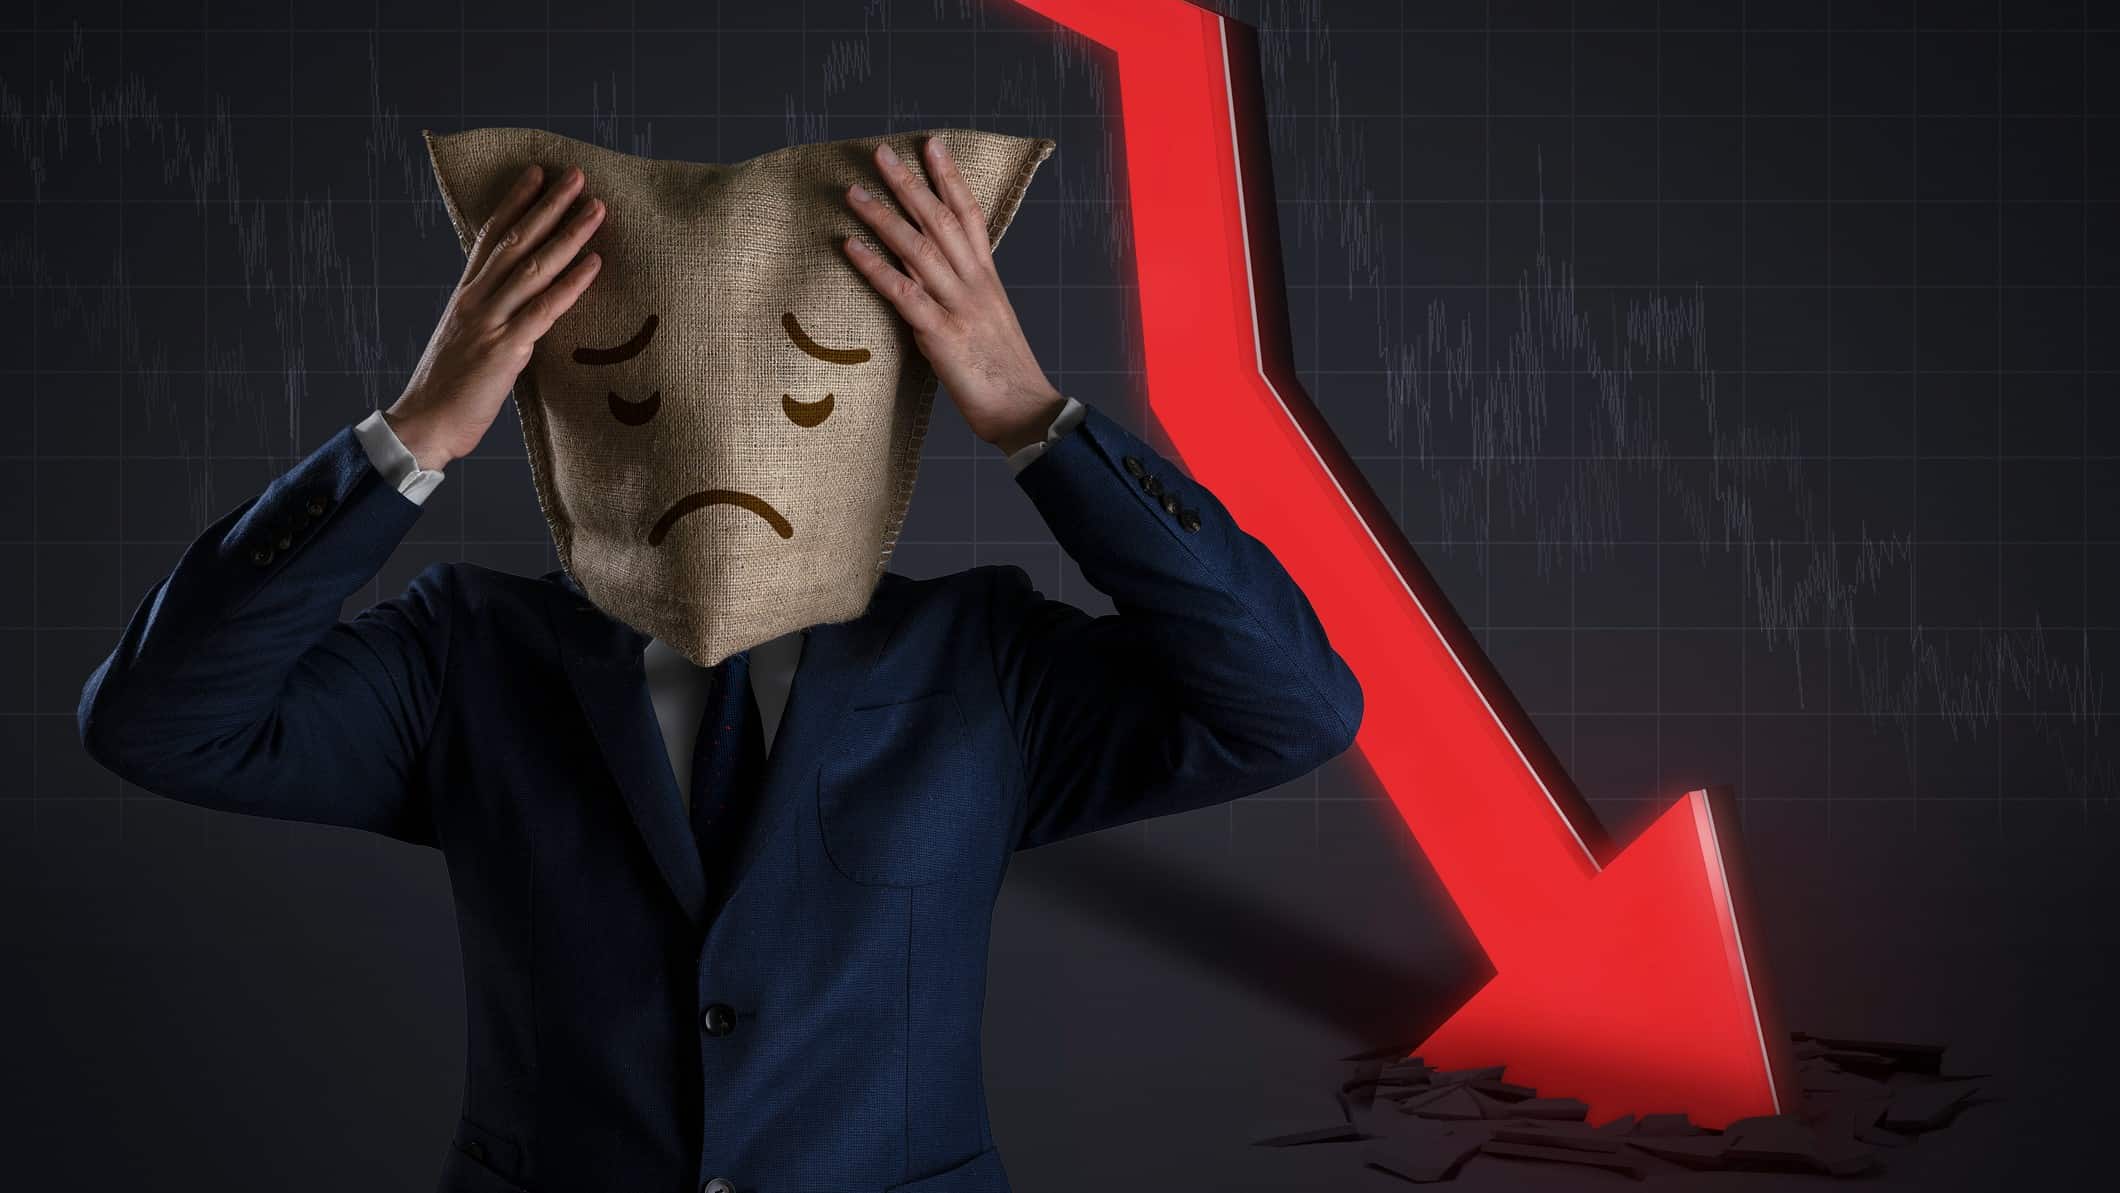 a person wearing a sad faced bag on his head stands with hands to head in front of a red arrow plunging into the ground, denoting a falling share price.